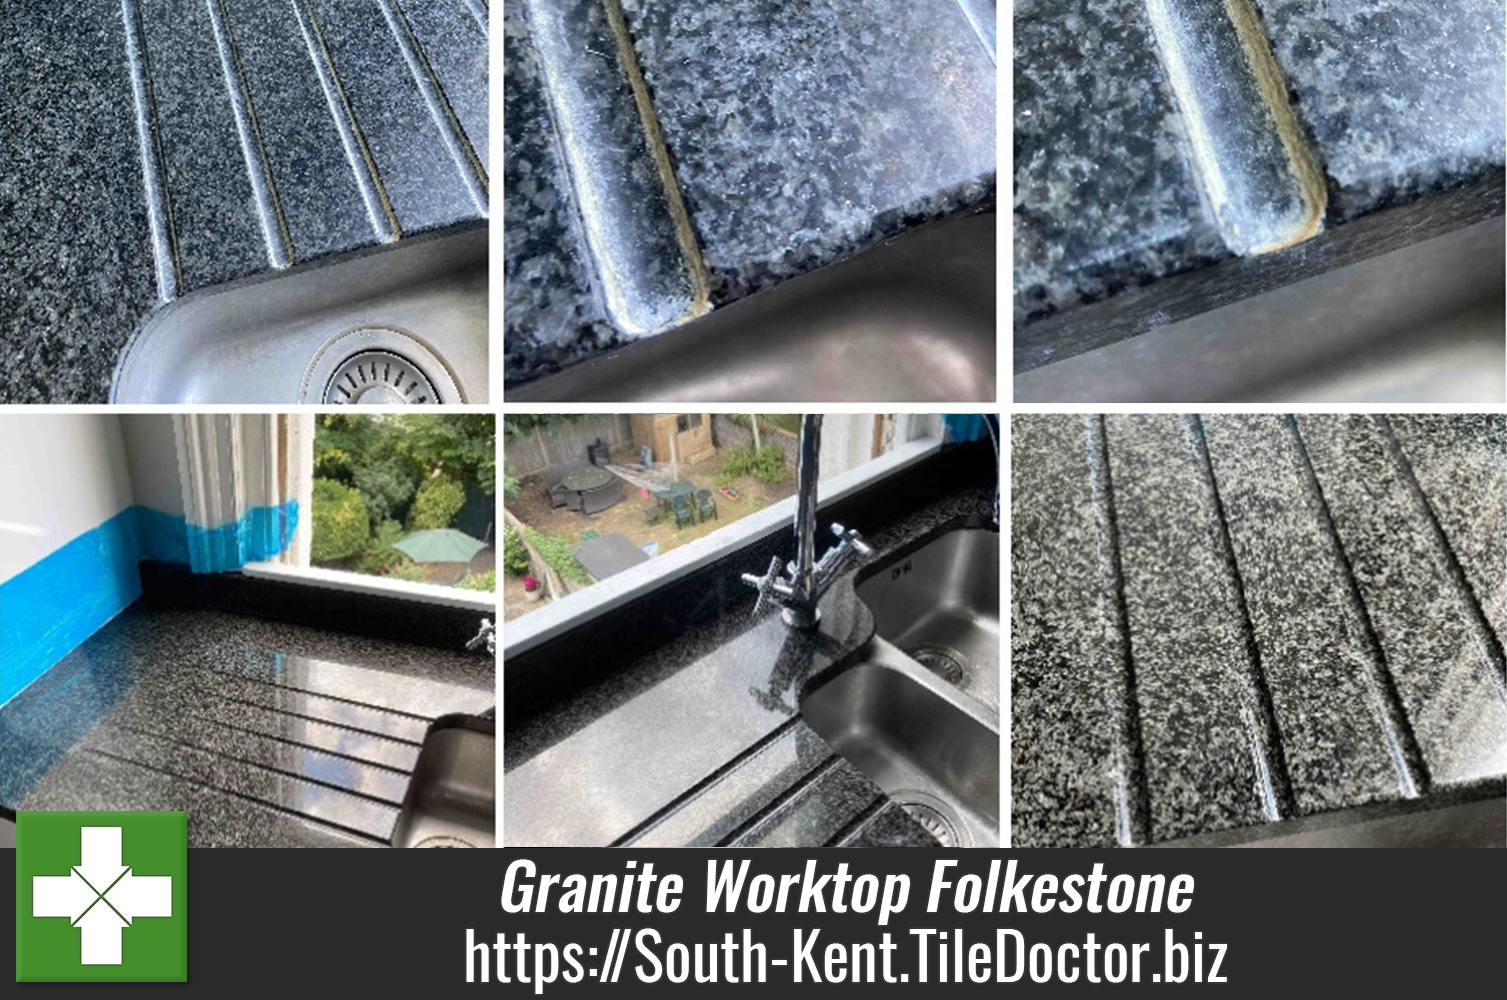 Removing Limescale from Granite Worktops in a Folkestone Kitchen